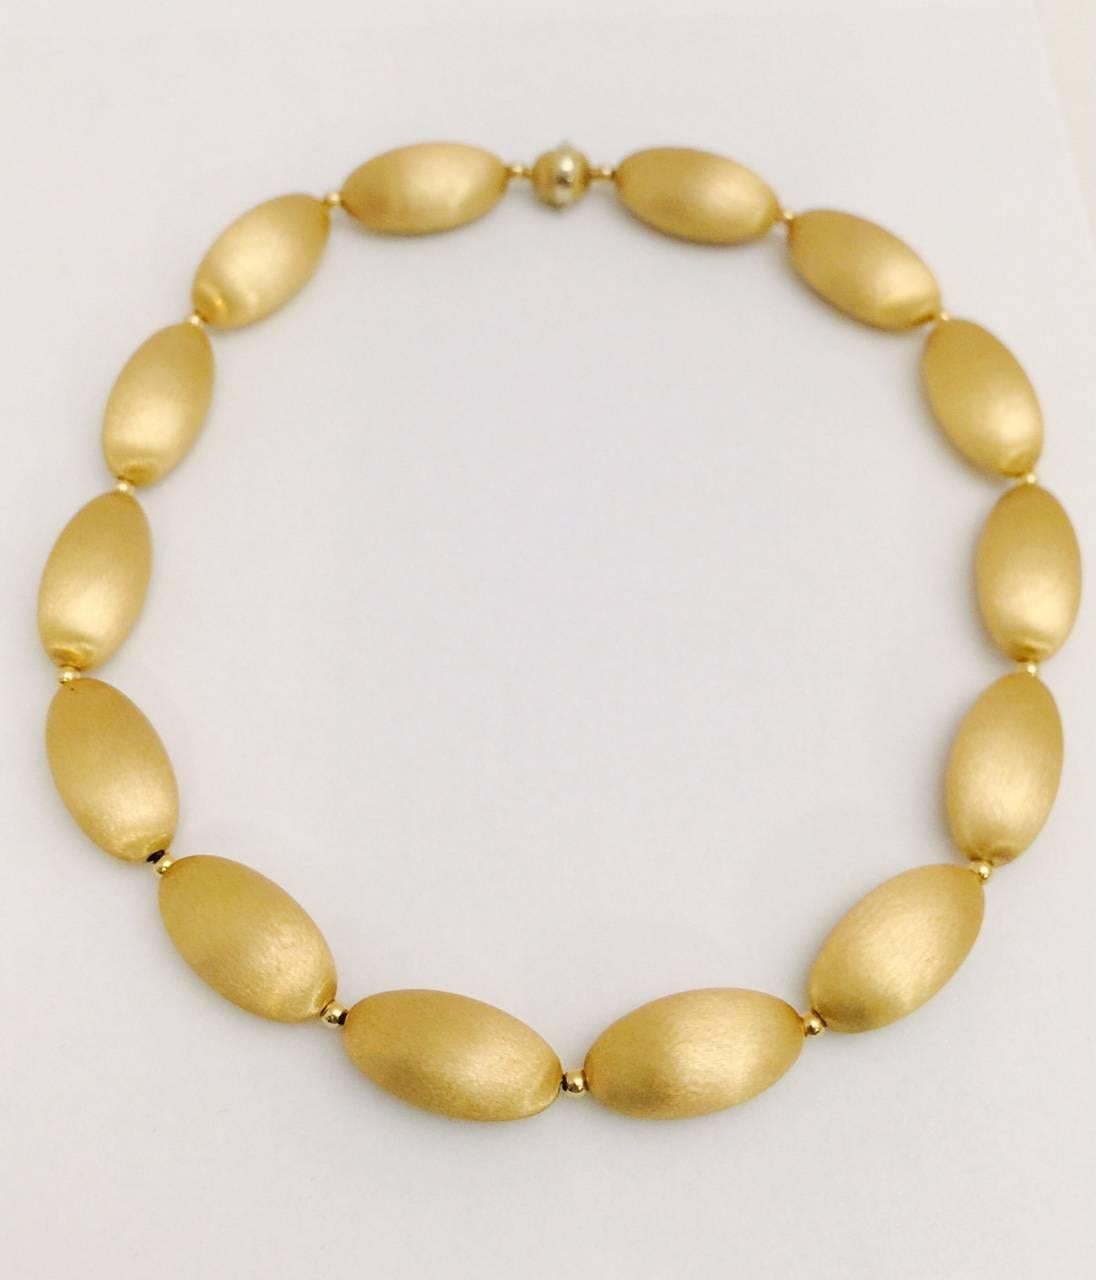 Nothing else feel like real gold is an understatement!  Originally purchased at Neiman Marcus for $9800 this fabulous necklace is 20".  A new kind of modern, minimalistic opulence with subtly textured 18 karat gold.  Oblong matte finish beads